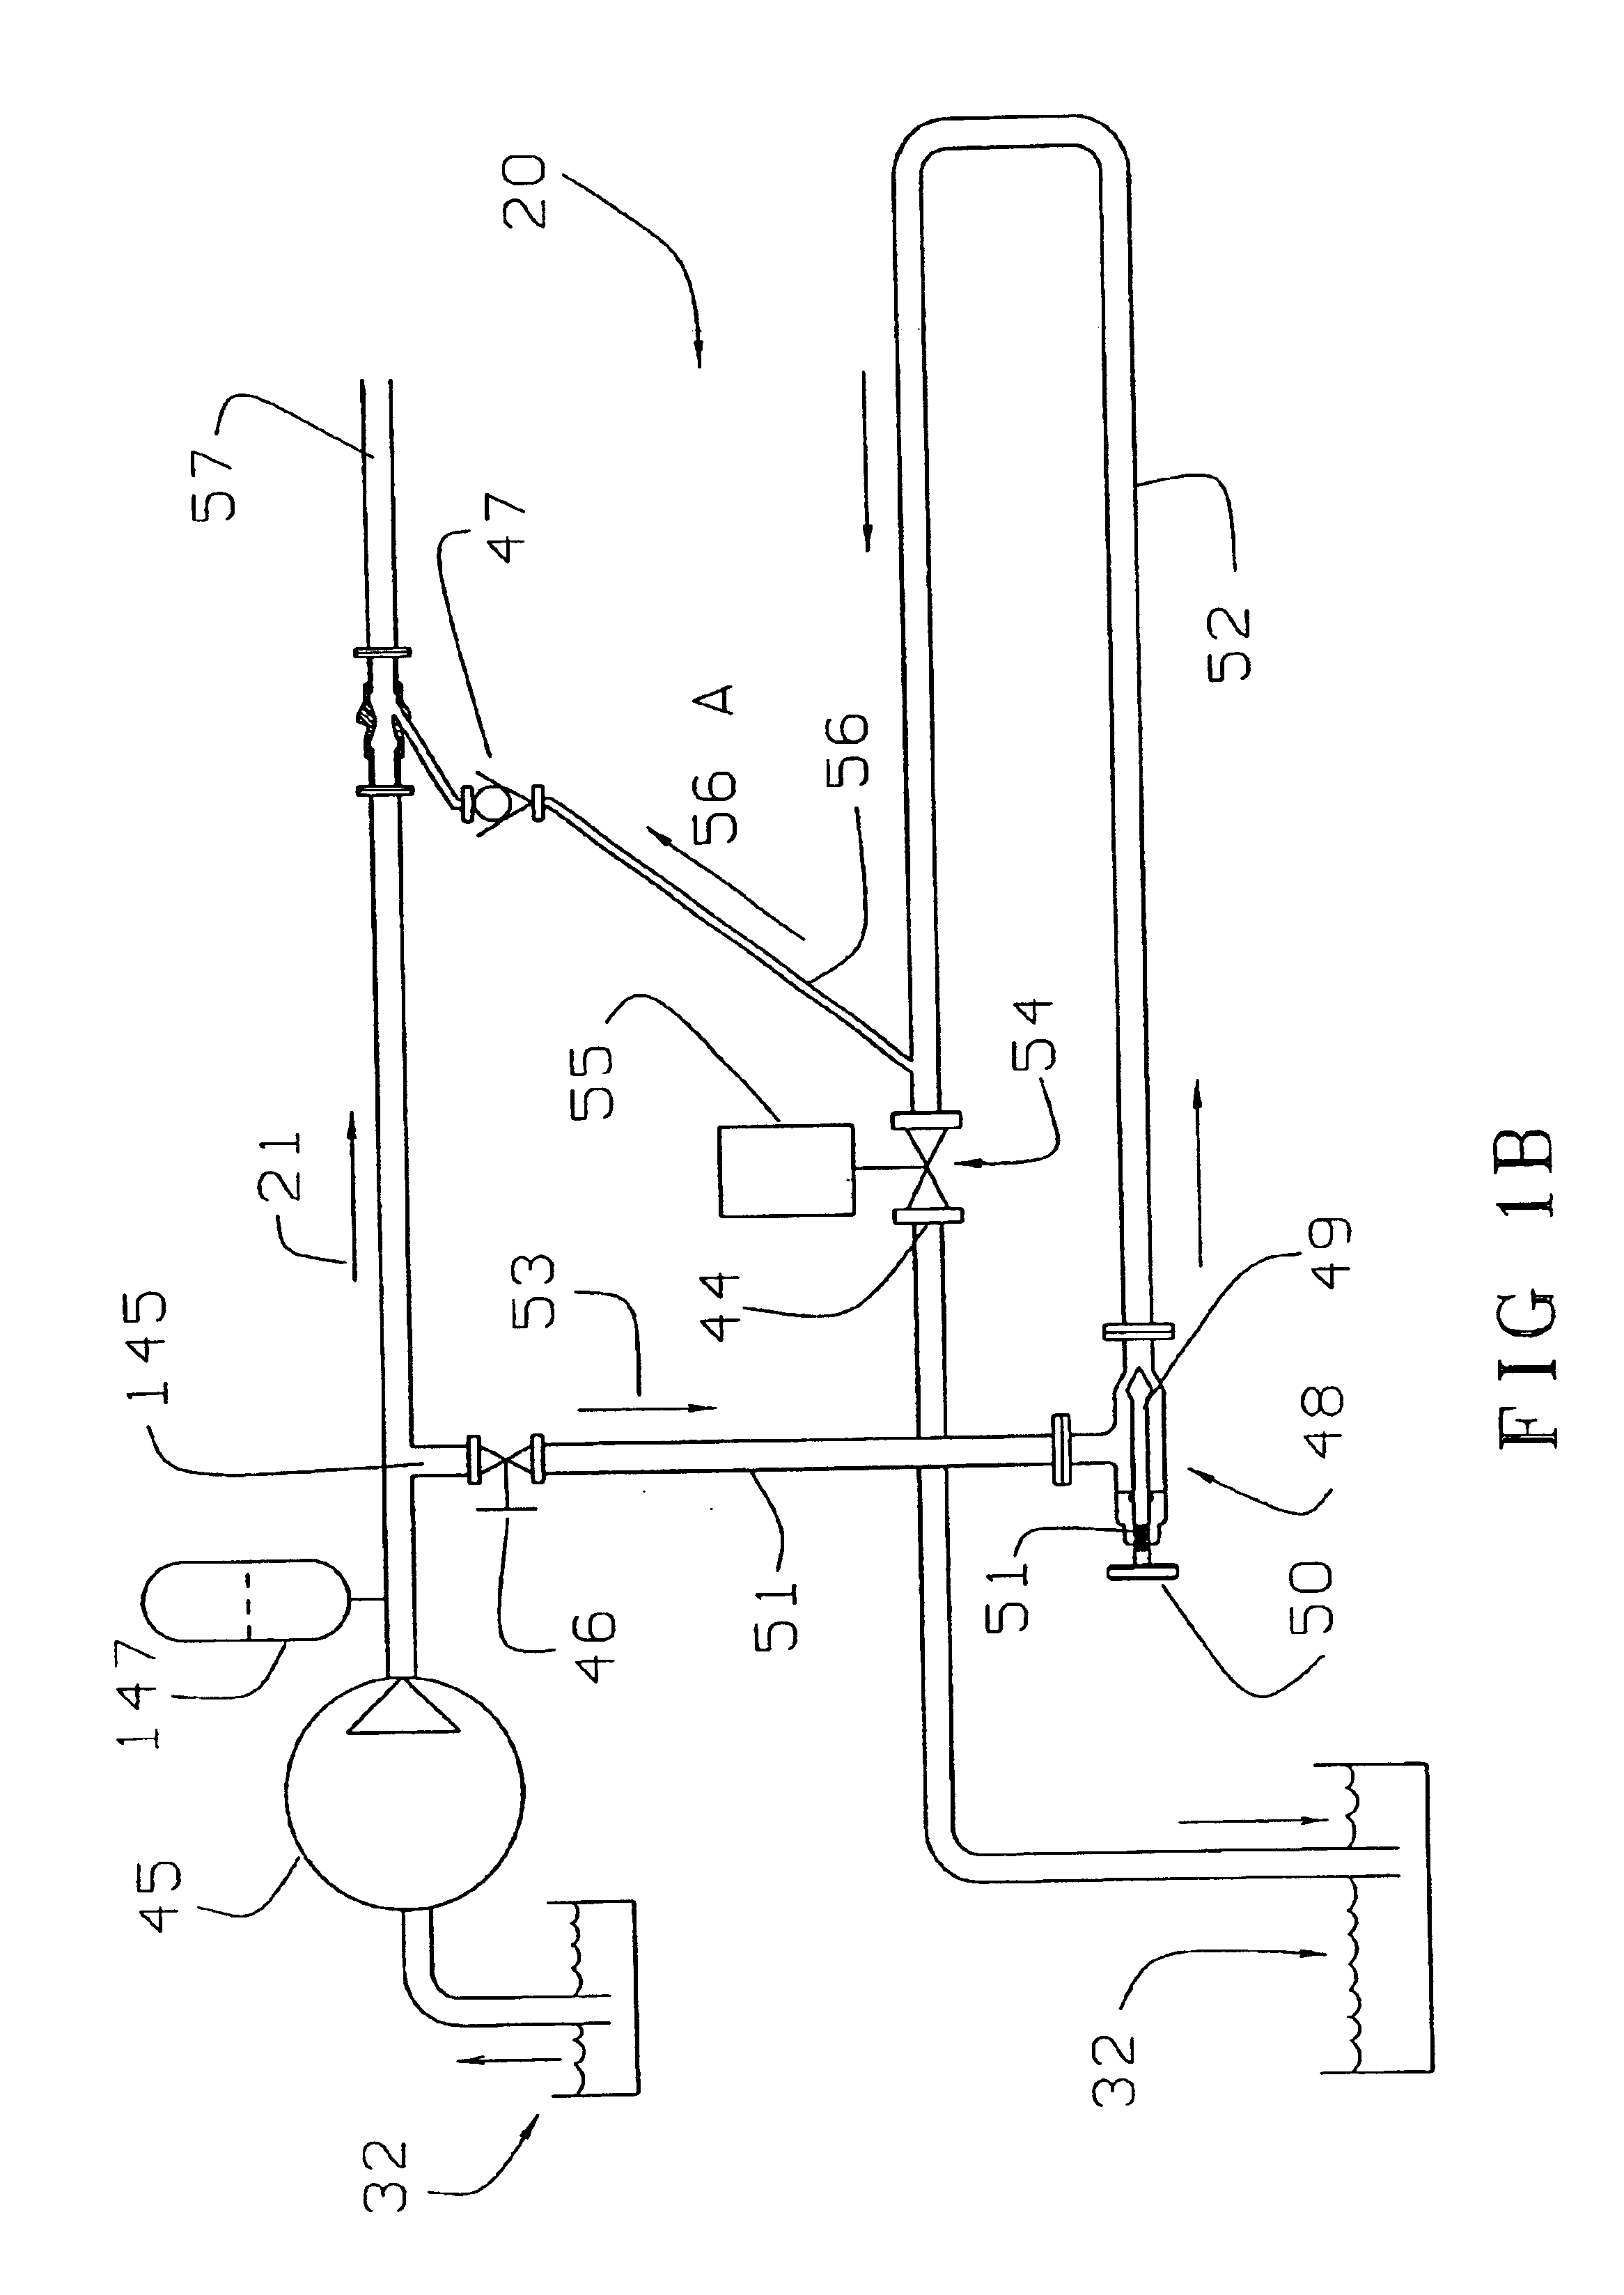 Acoustic flow pulsing apparatus and method for drill string